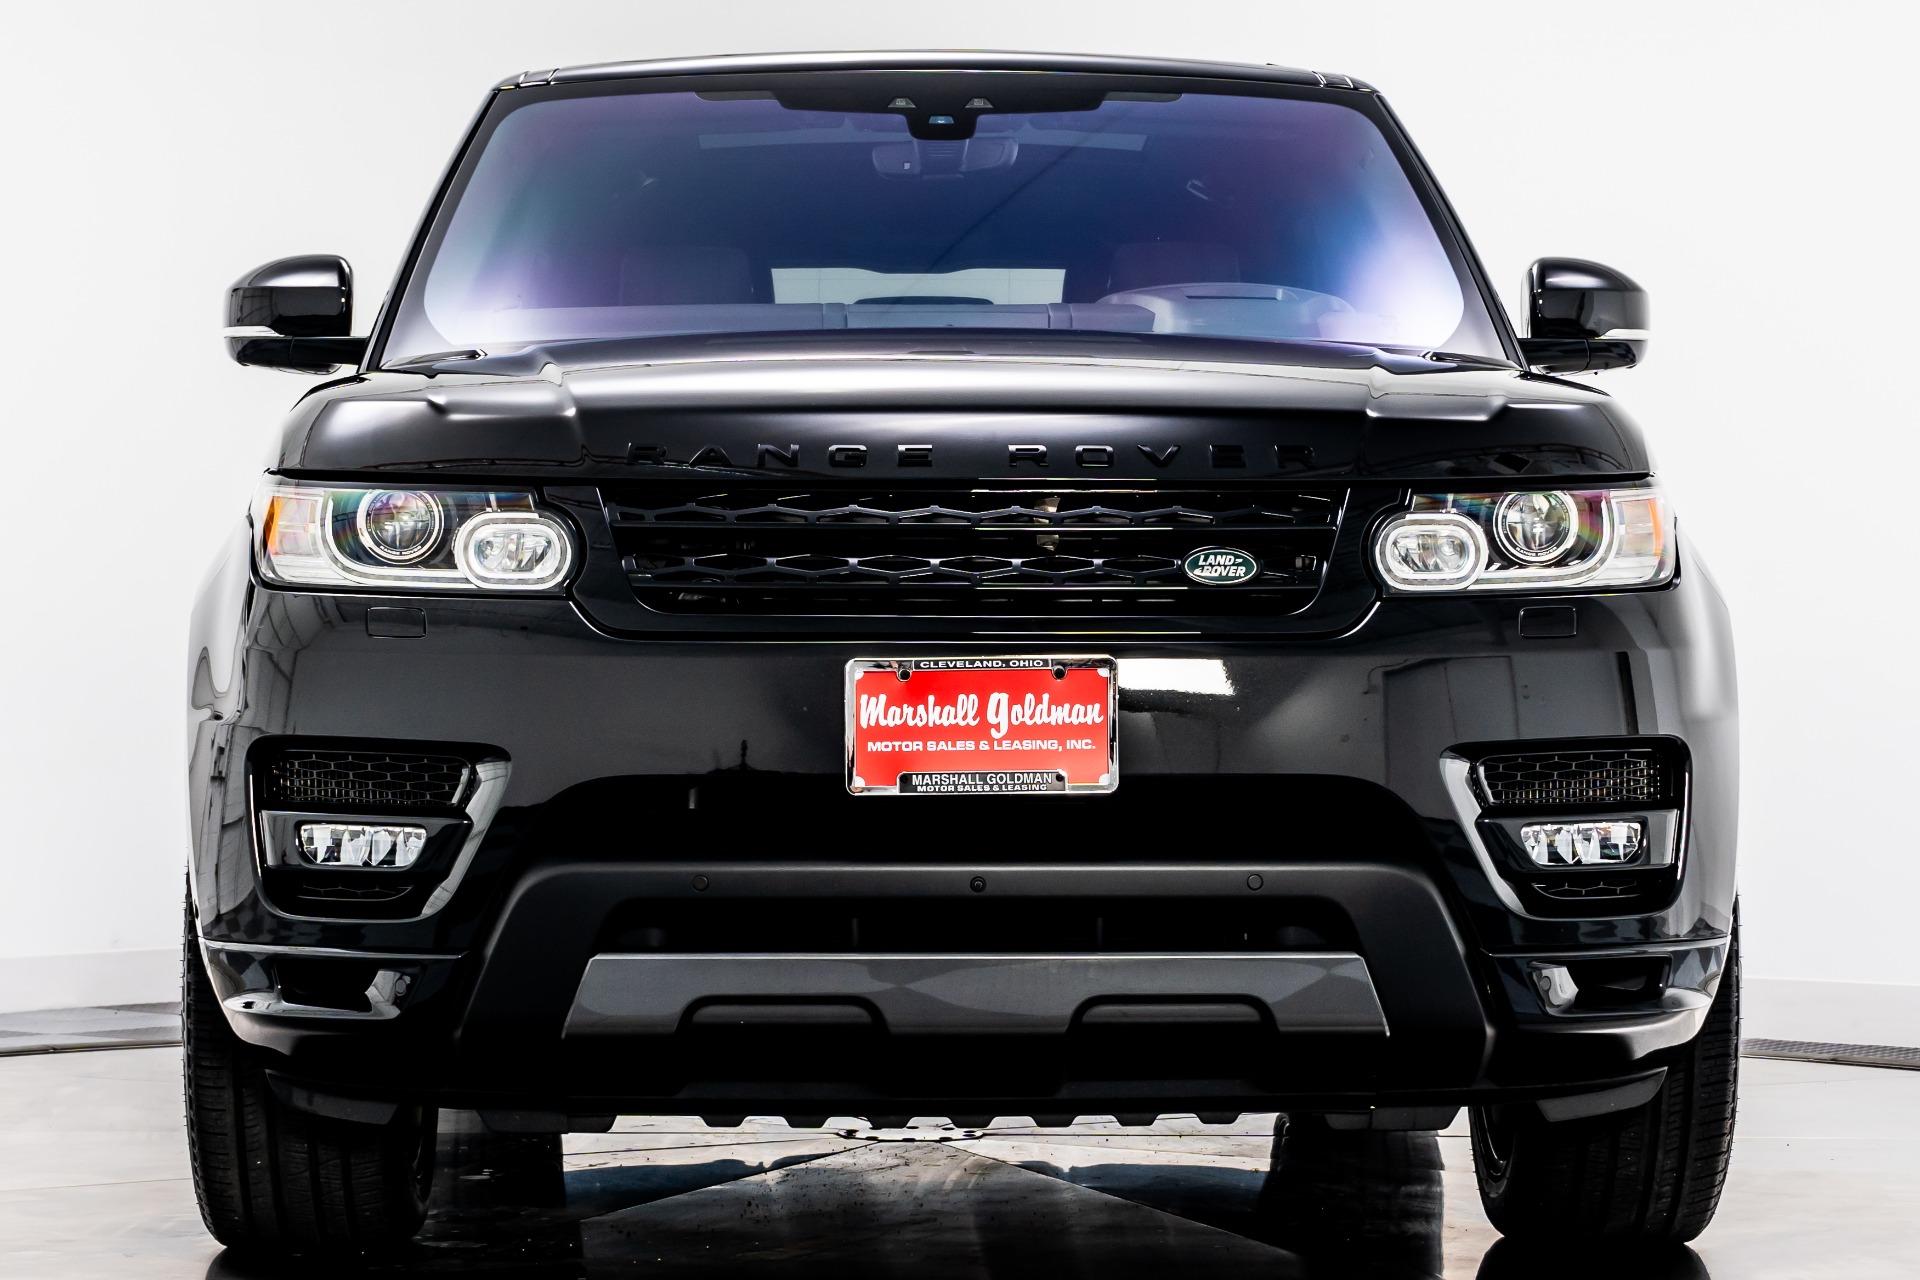 Range Rover Dealership Cleveland Ohio  : I Have Been At A Land Rover Dealership For Over Four Years And Recently Decided To Open My Own Place.pRevious To This I Was A Senior Master Technician With Ford Where In Cleveland?